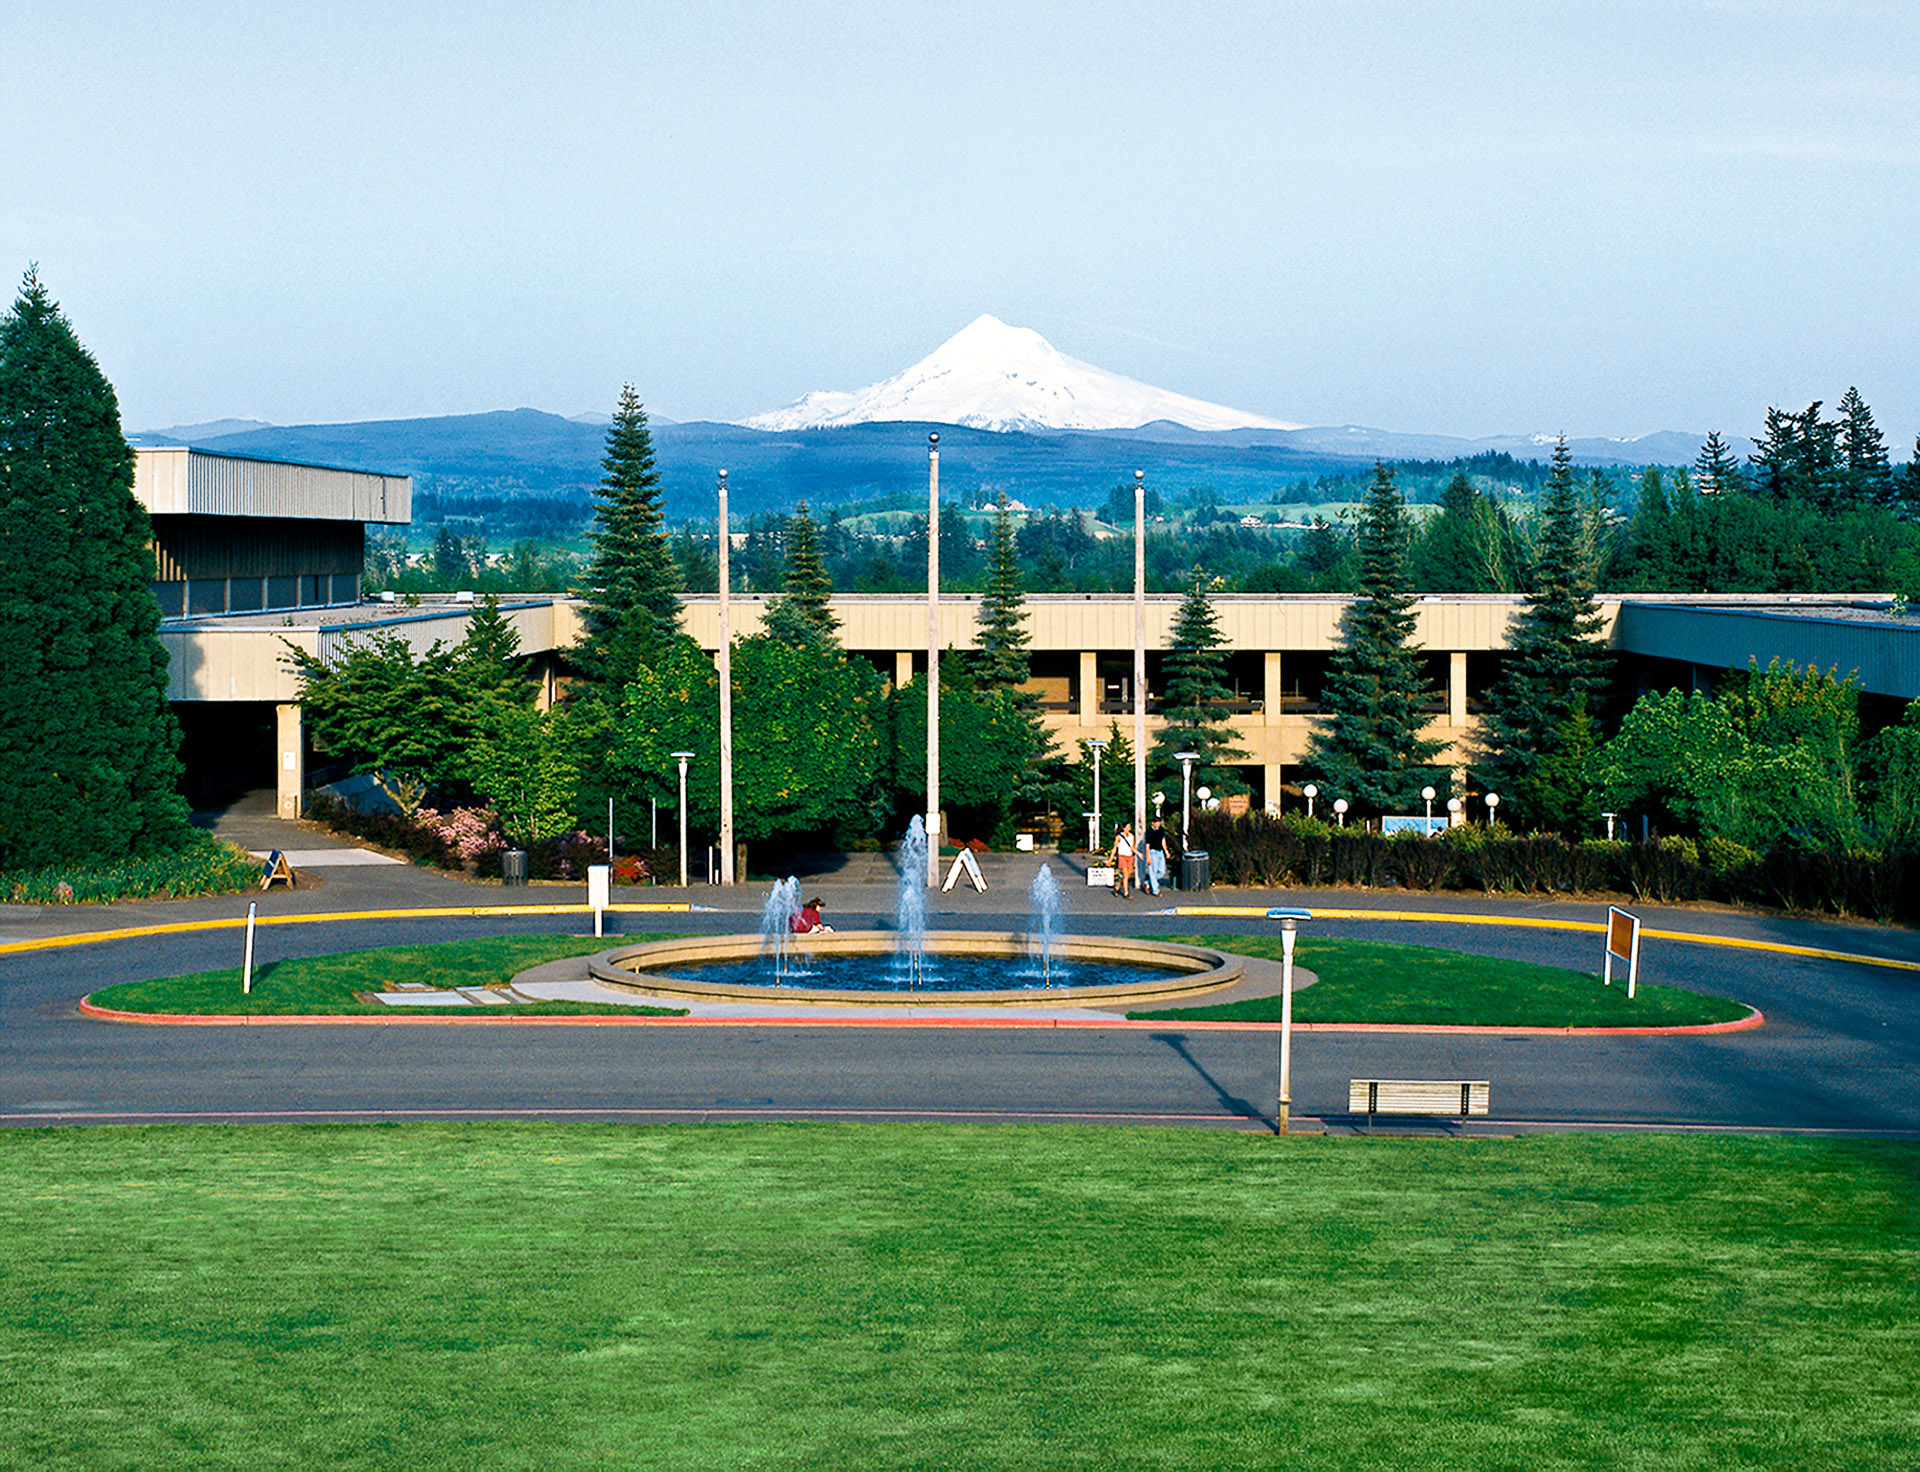 Campus with snow-covered Mt. Hood in the background